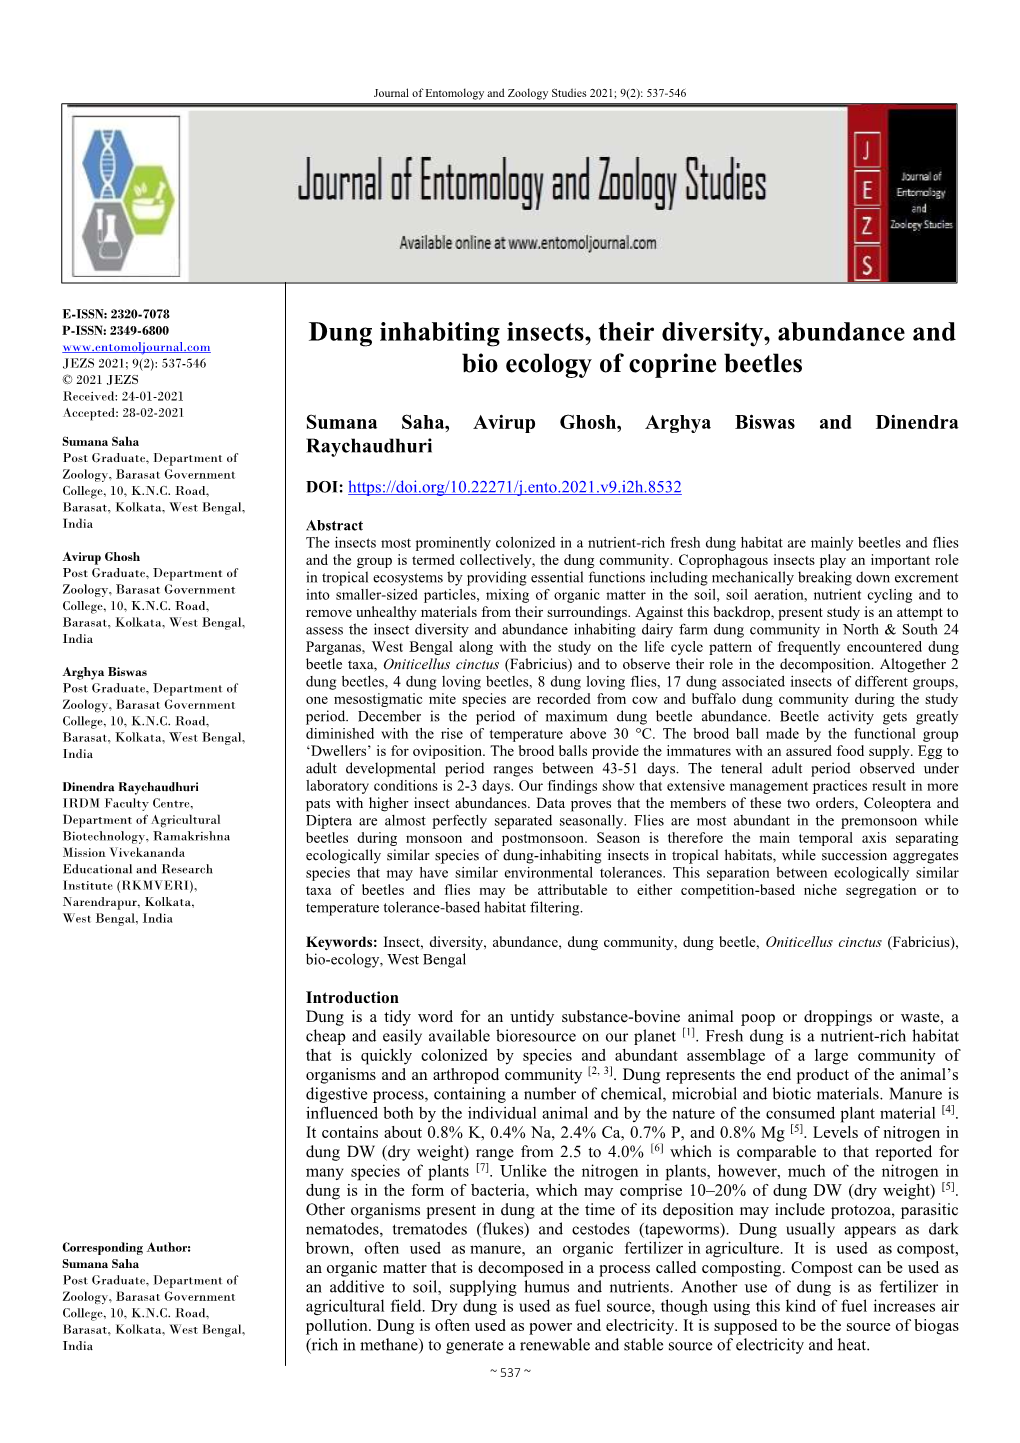 Dung Inhabiting Insects, Their Diversity, Abundance and Bio